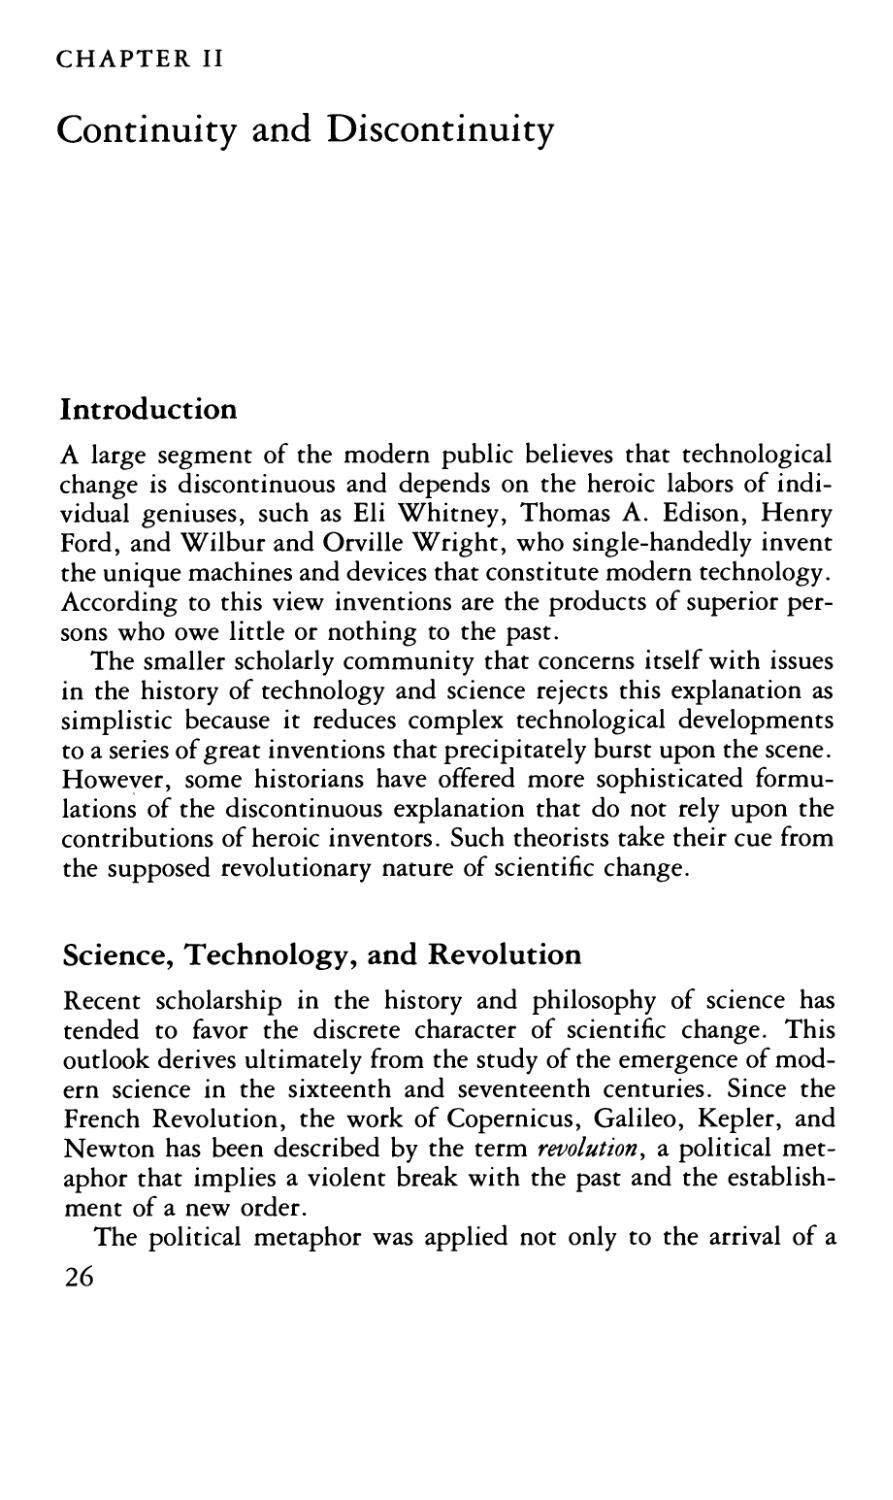 II Continuity and Discontinuity
Science, Technology, and Revolution